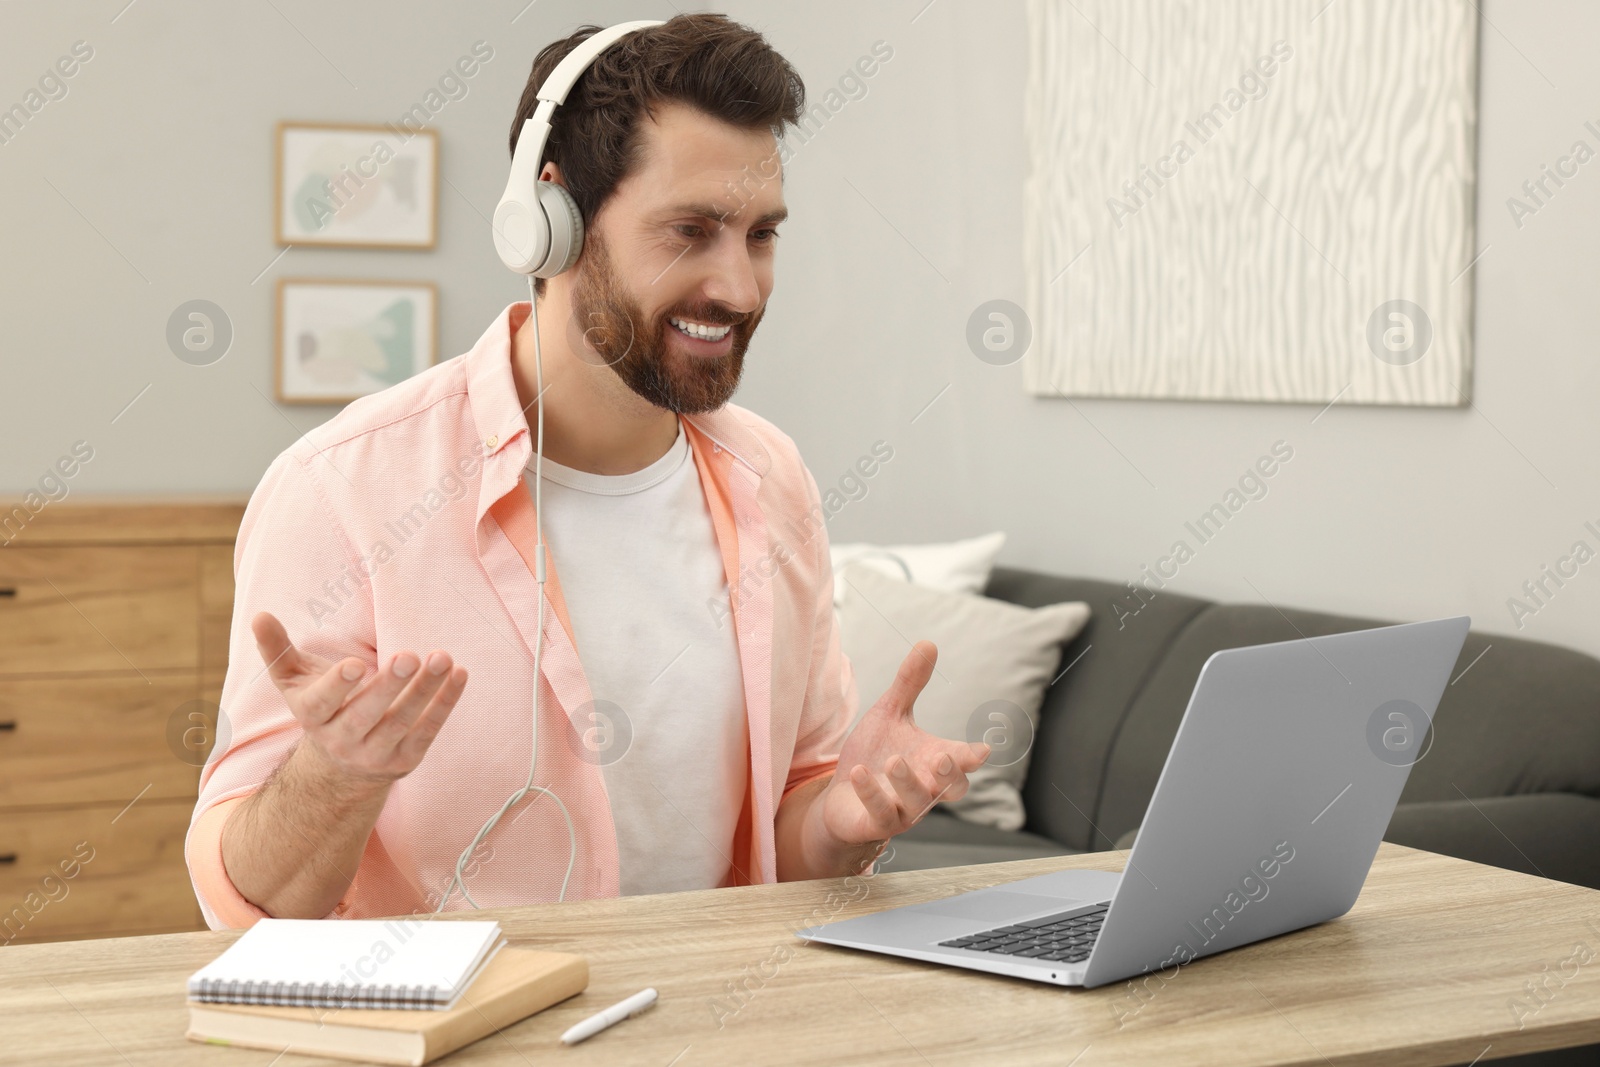 Photo of Man in headphones having video chat via laptop at home